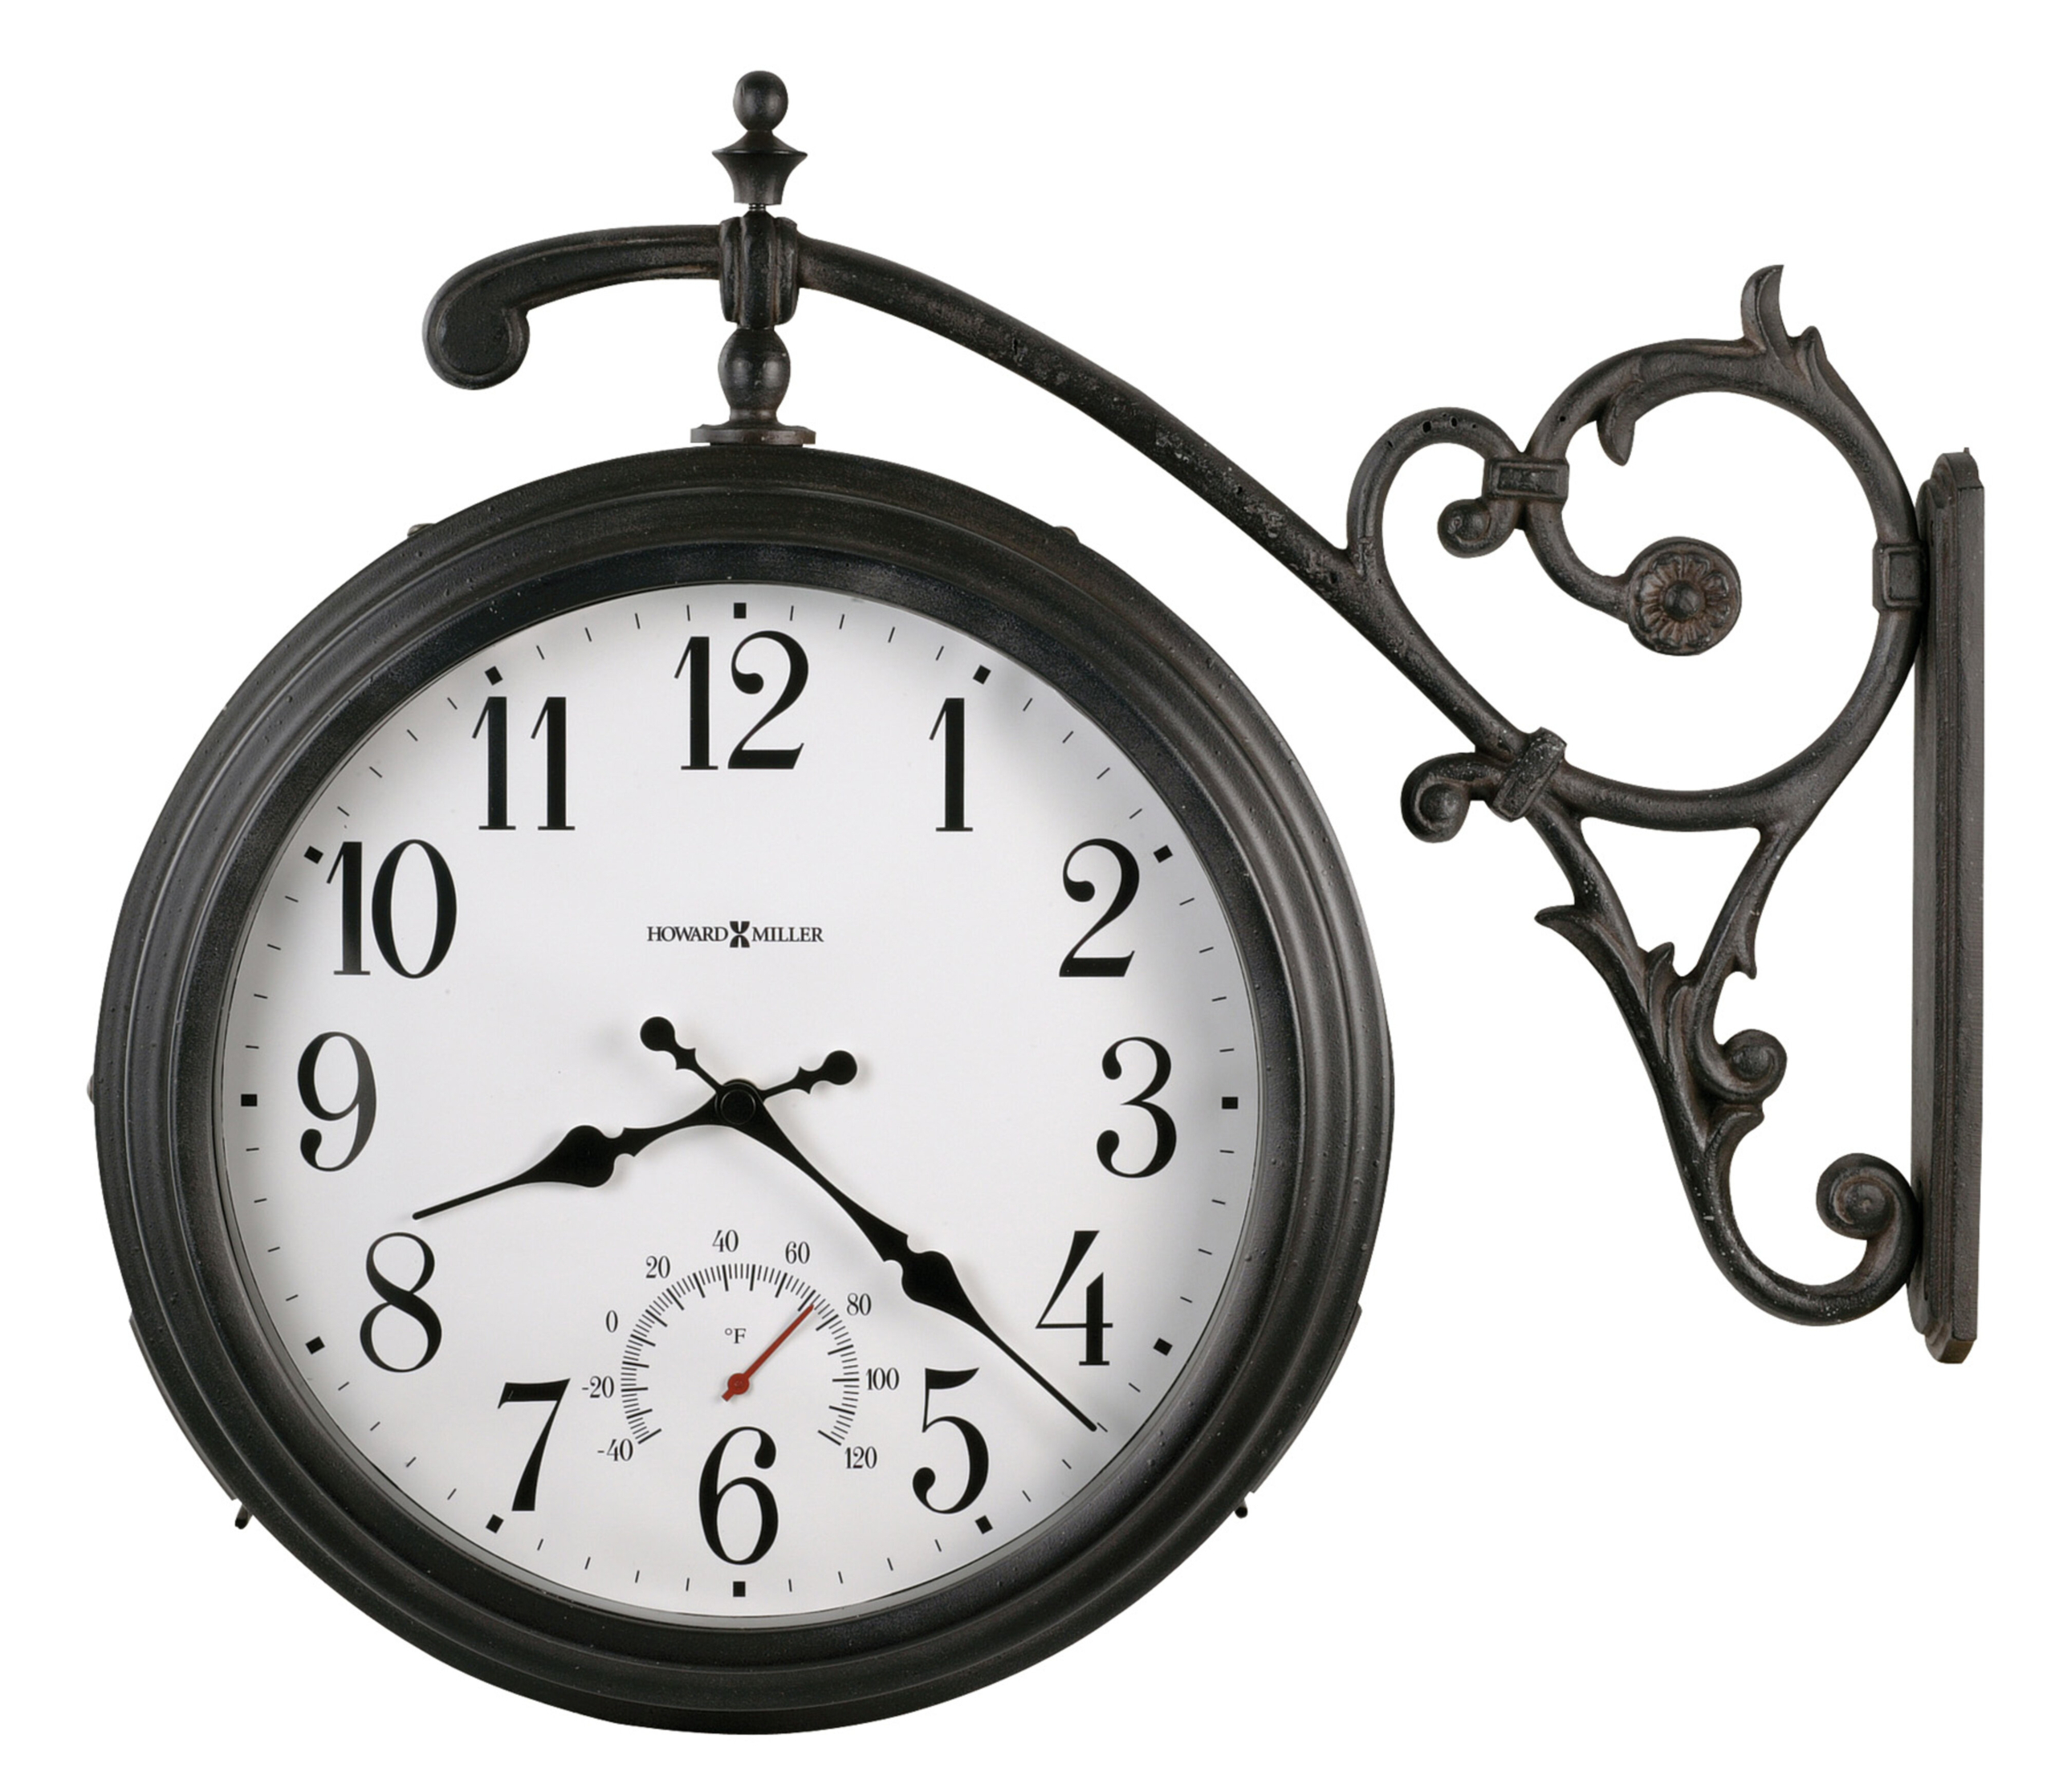 Decorative Outdoor Clock And Thermometer Set 